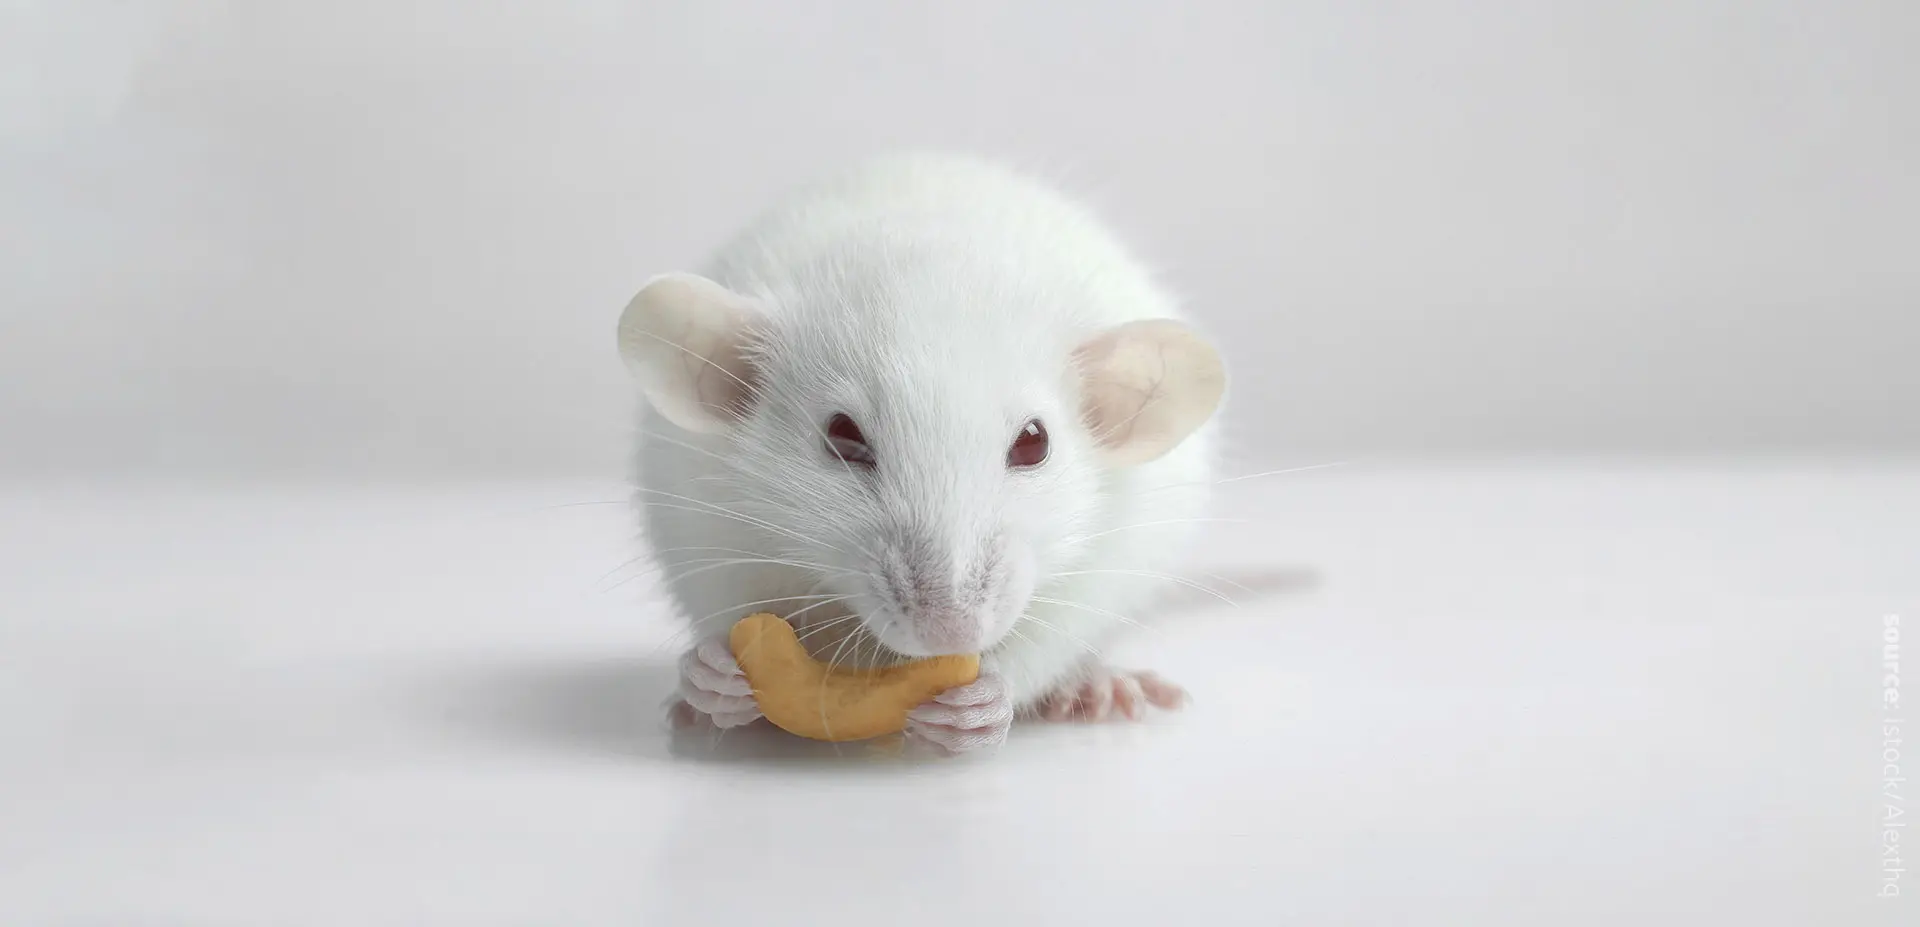 A photo of a white mouse eating a cashew nut.